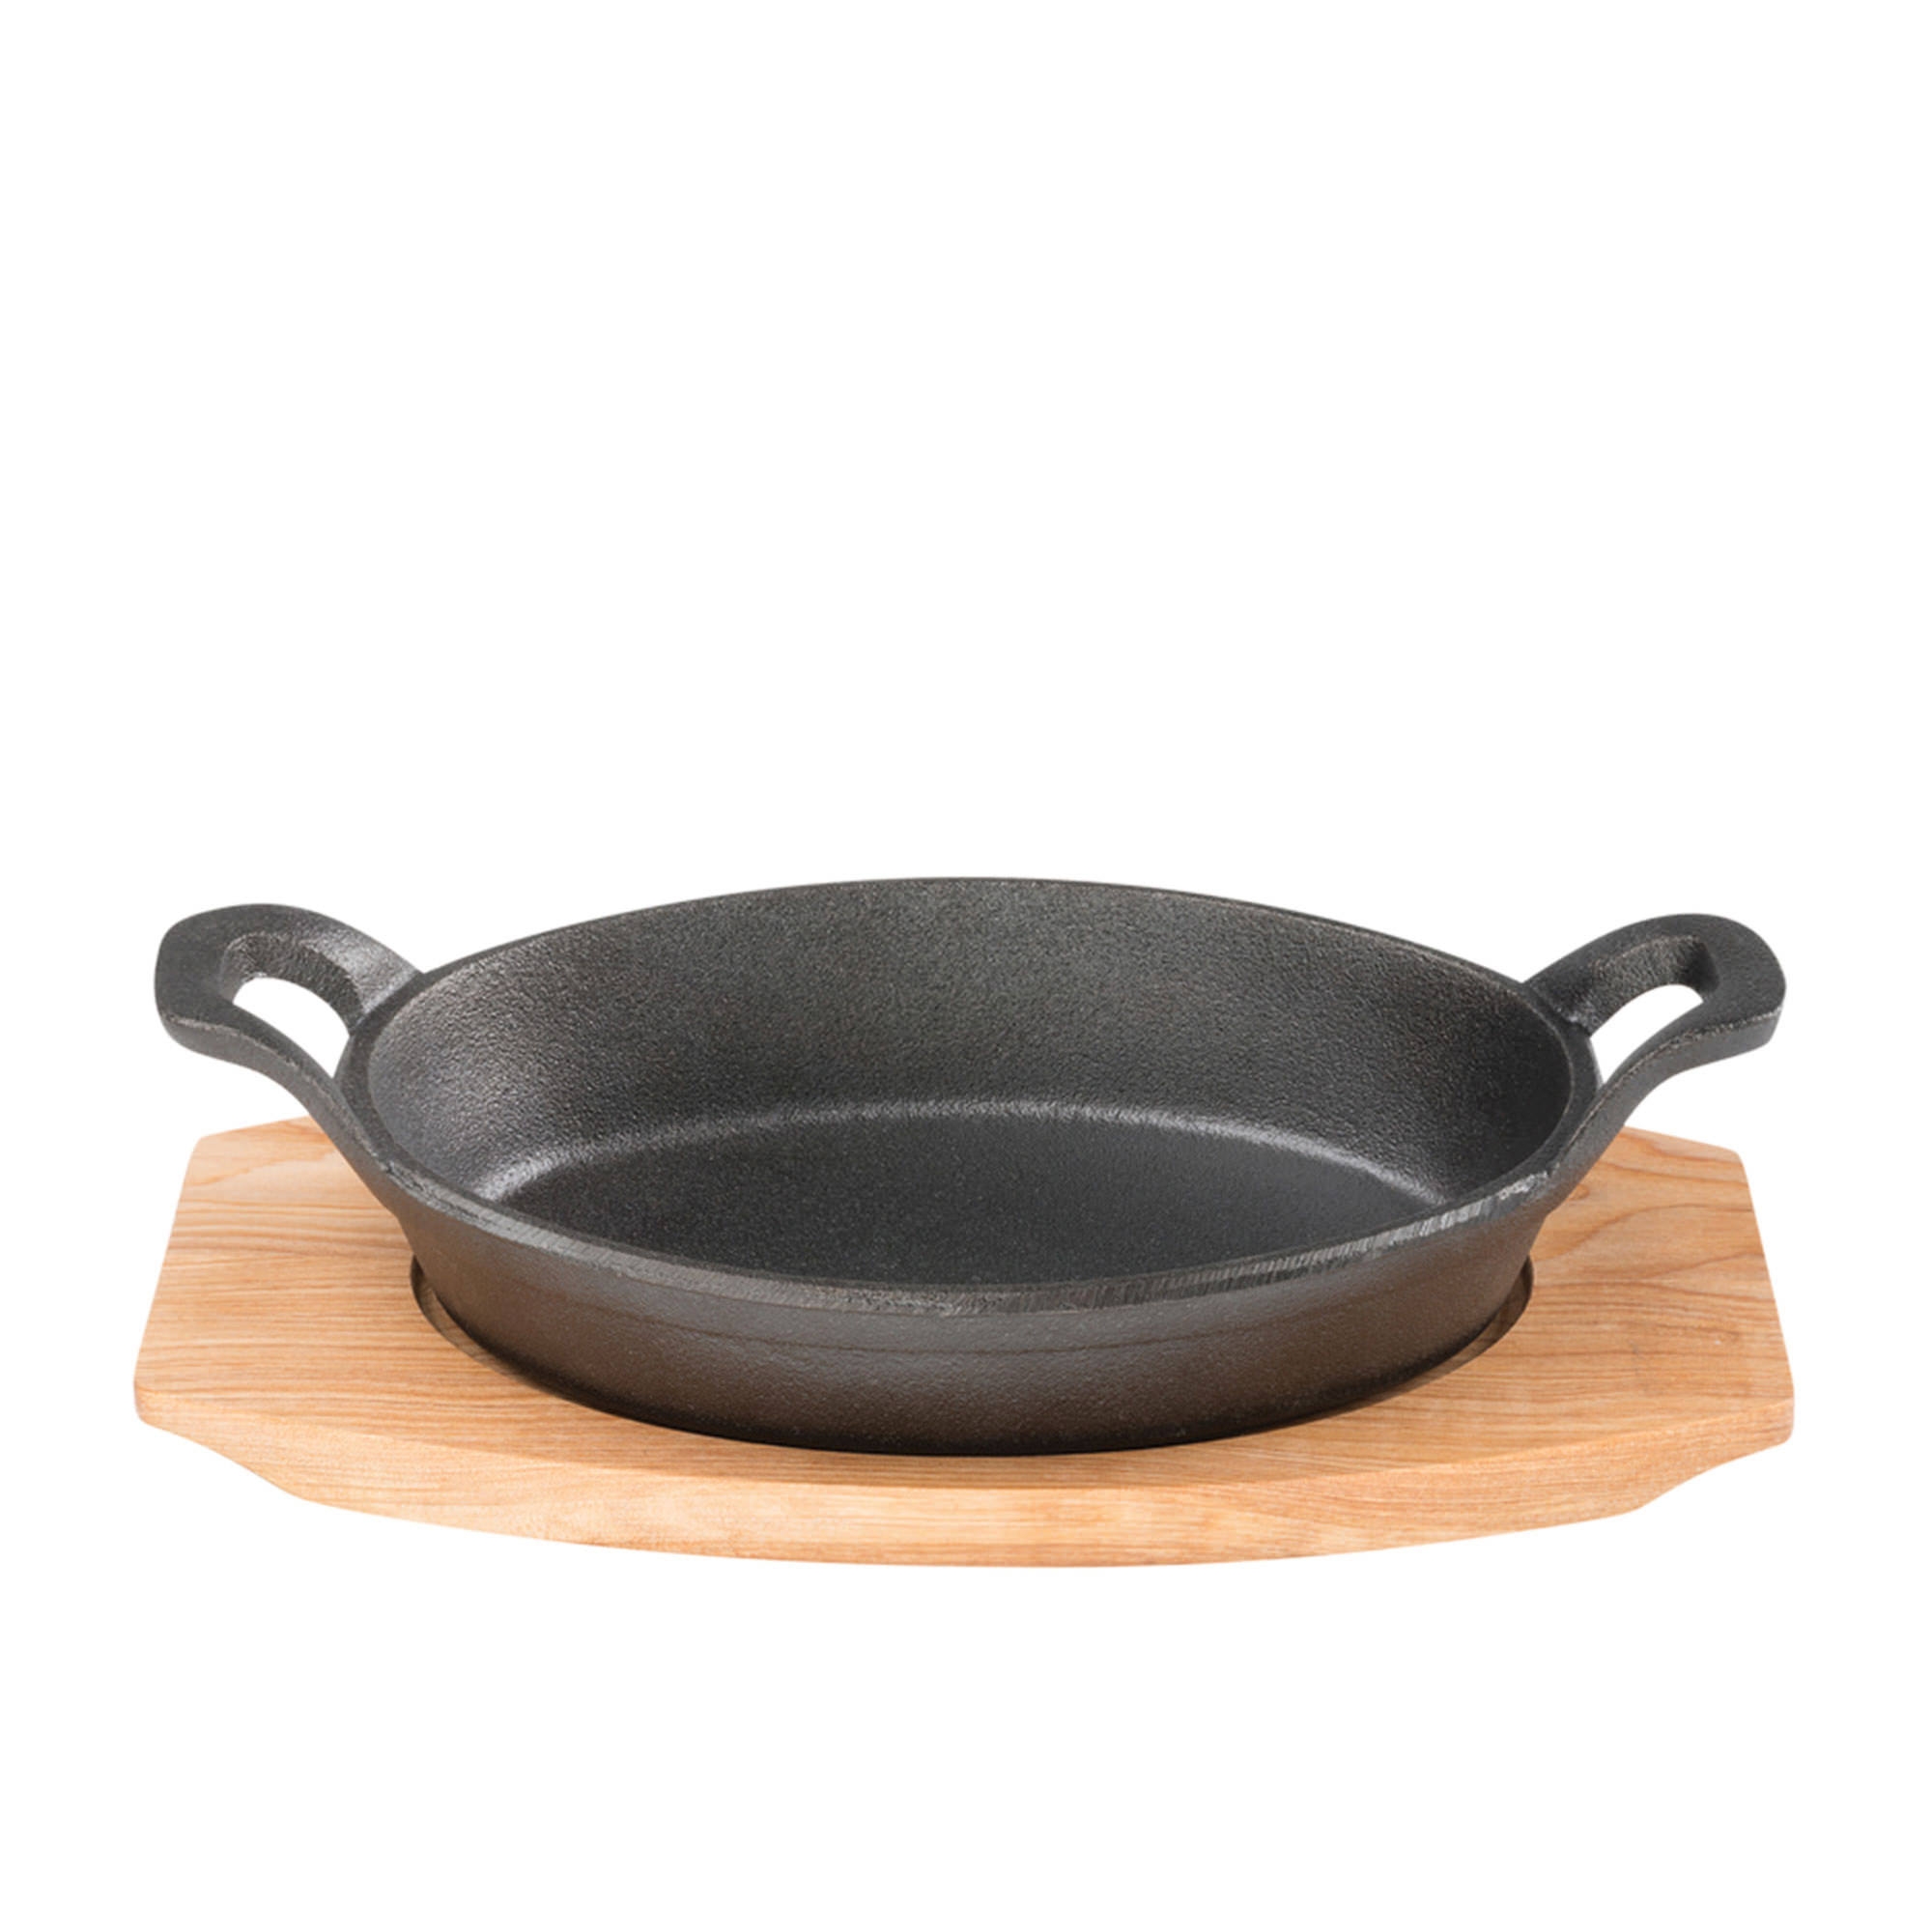 Pyrolux Pyrocast Cast Iron Oval Gratin with Maple Tray 21.7x15cm Image 1